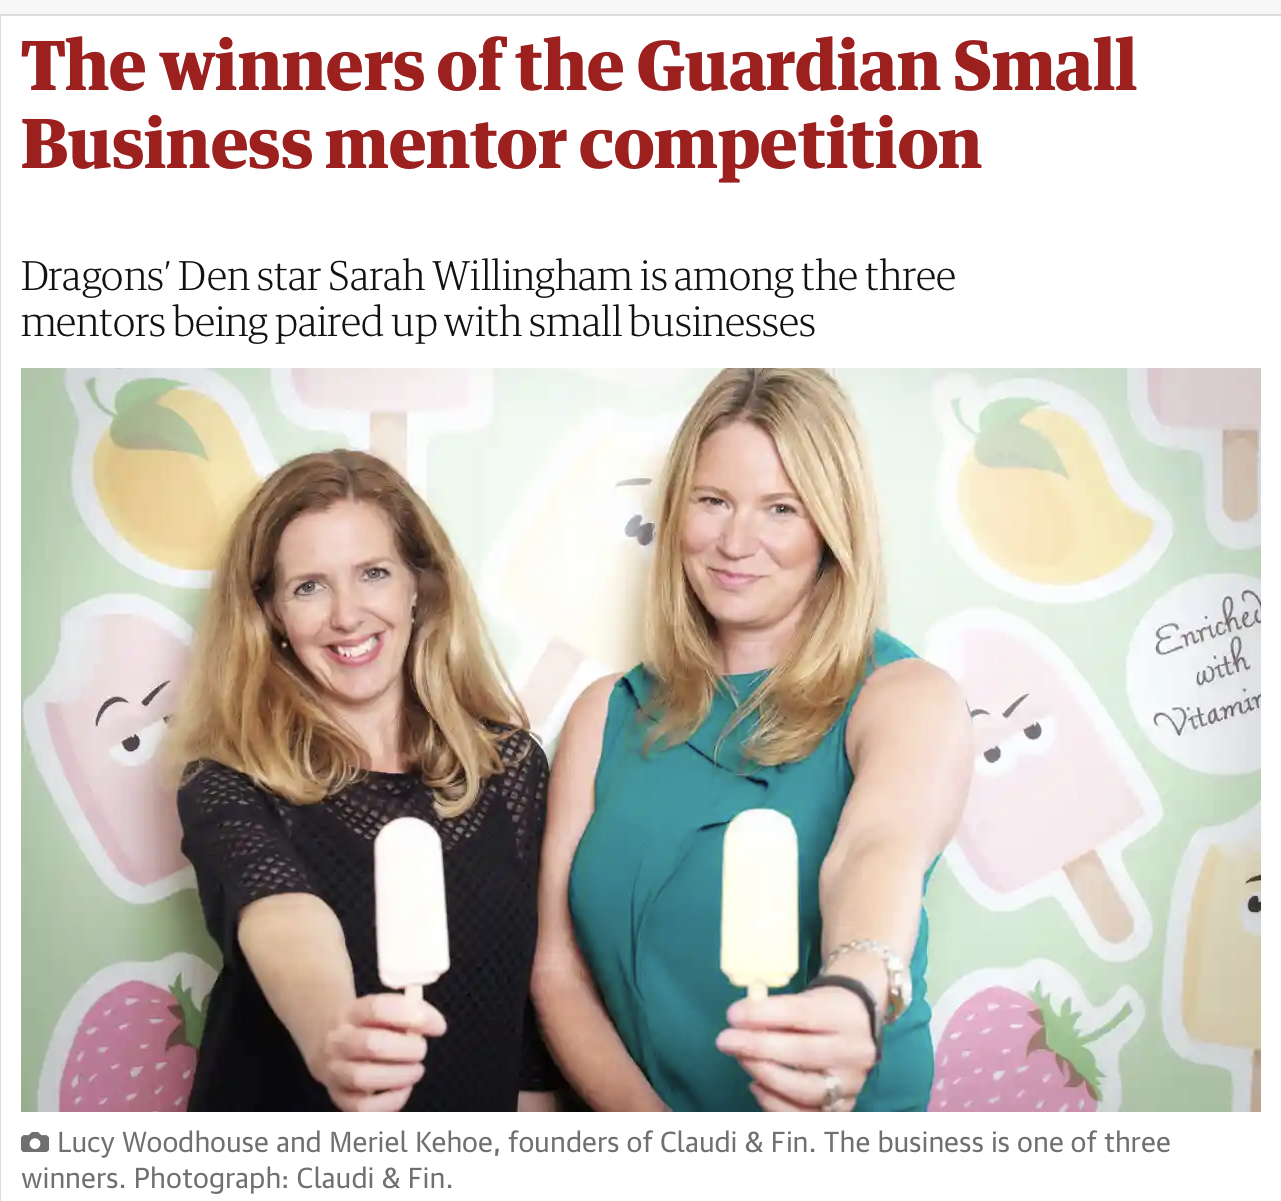 The Guardian Small Business Winners